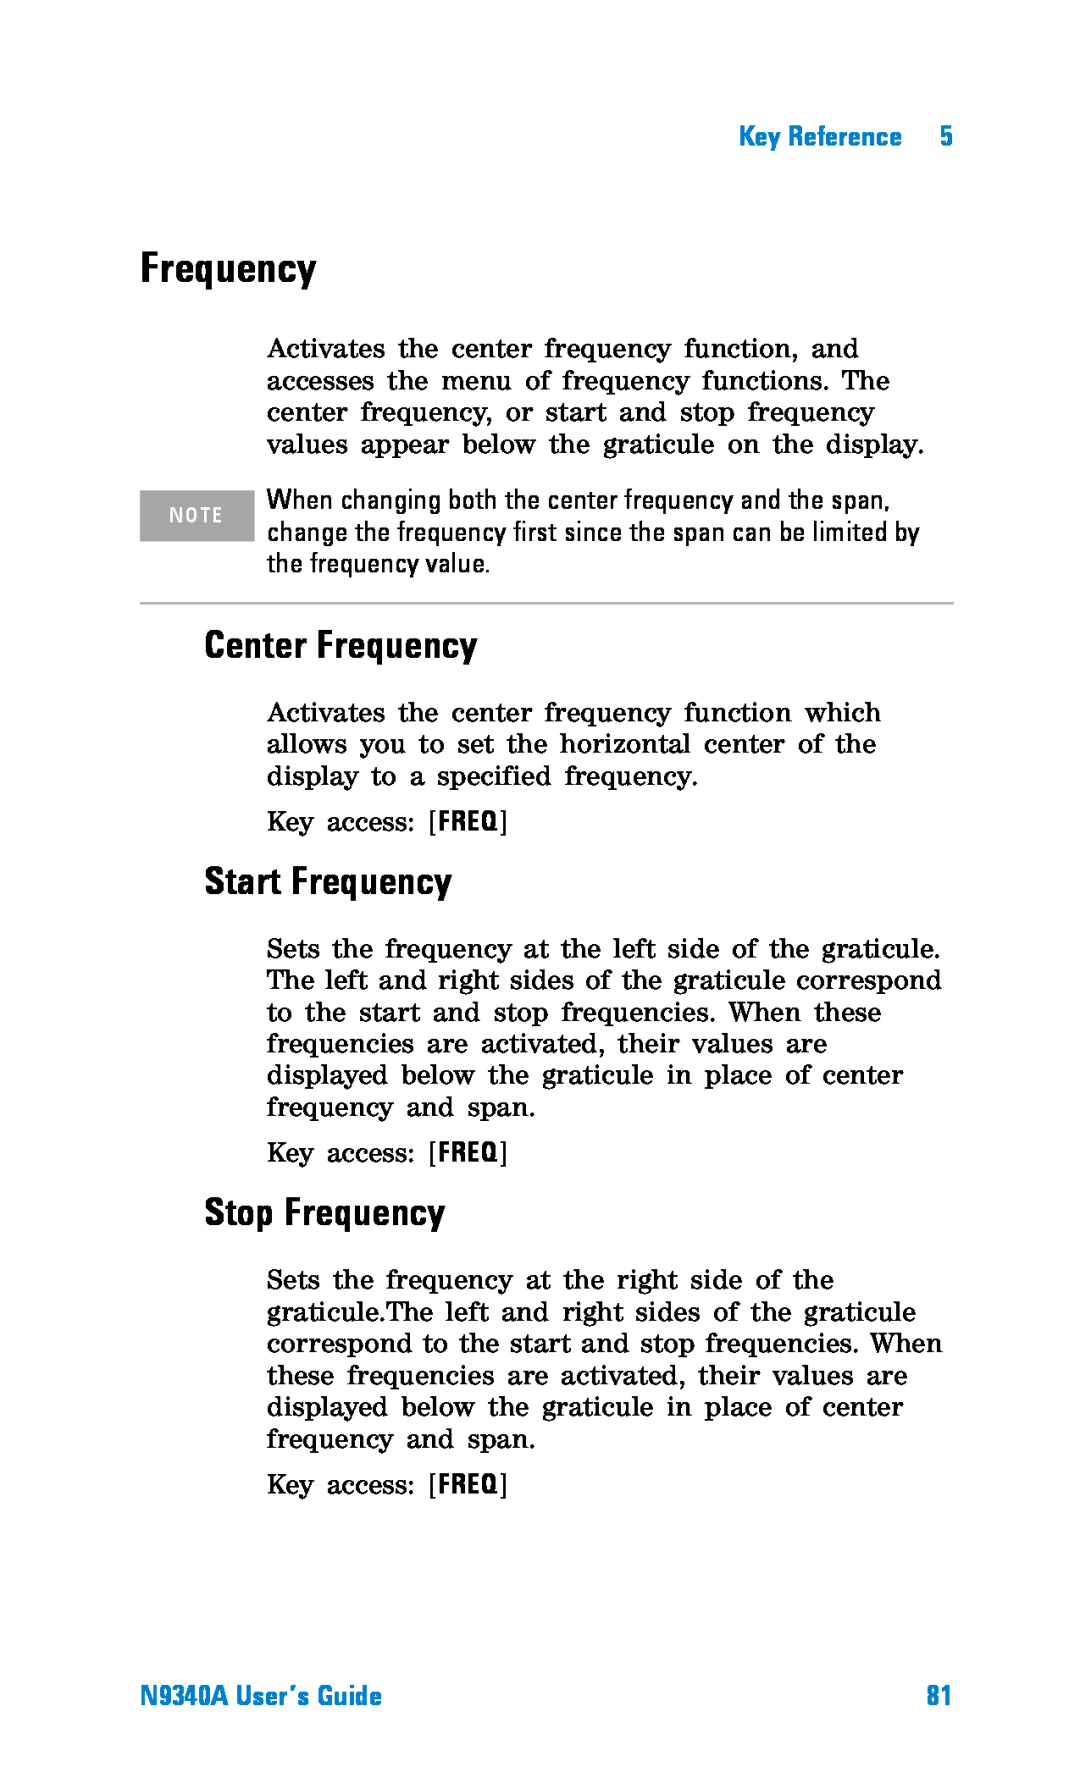 Agilent Technologies manual Center Frequency, Start Frequency, Stop Frequency, Key Reference, N9340A User’s Guide 